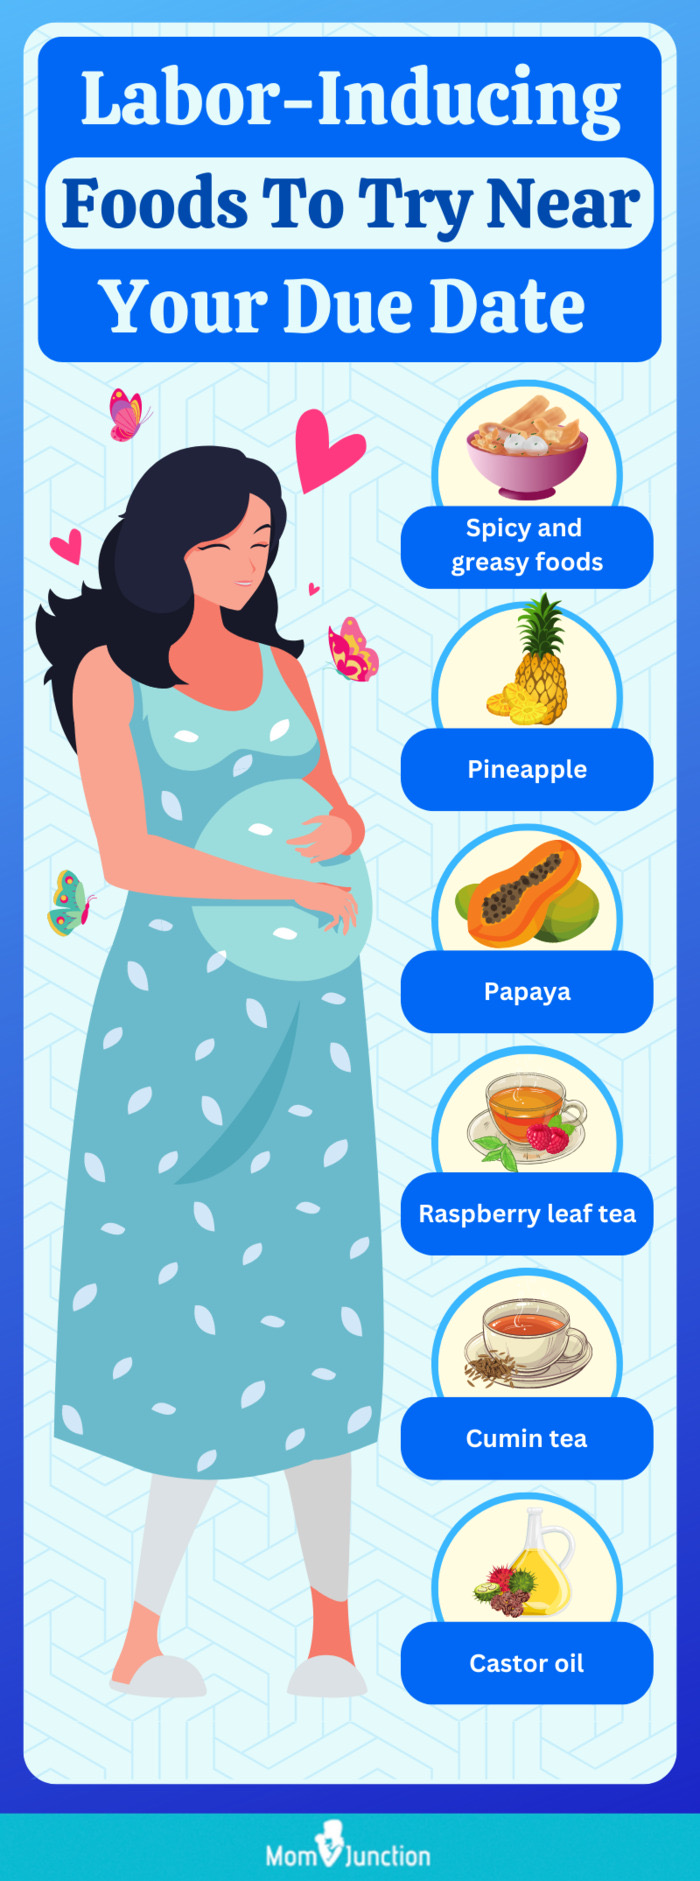 labor inducing foods to try near your due date (infographic)